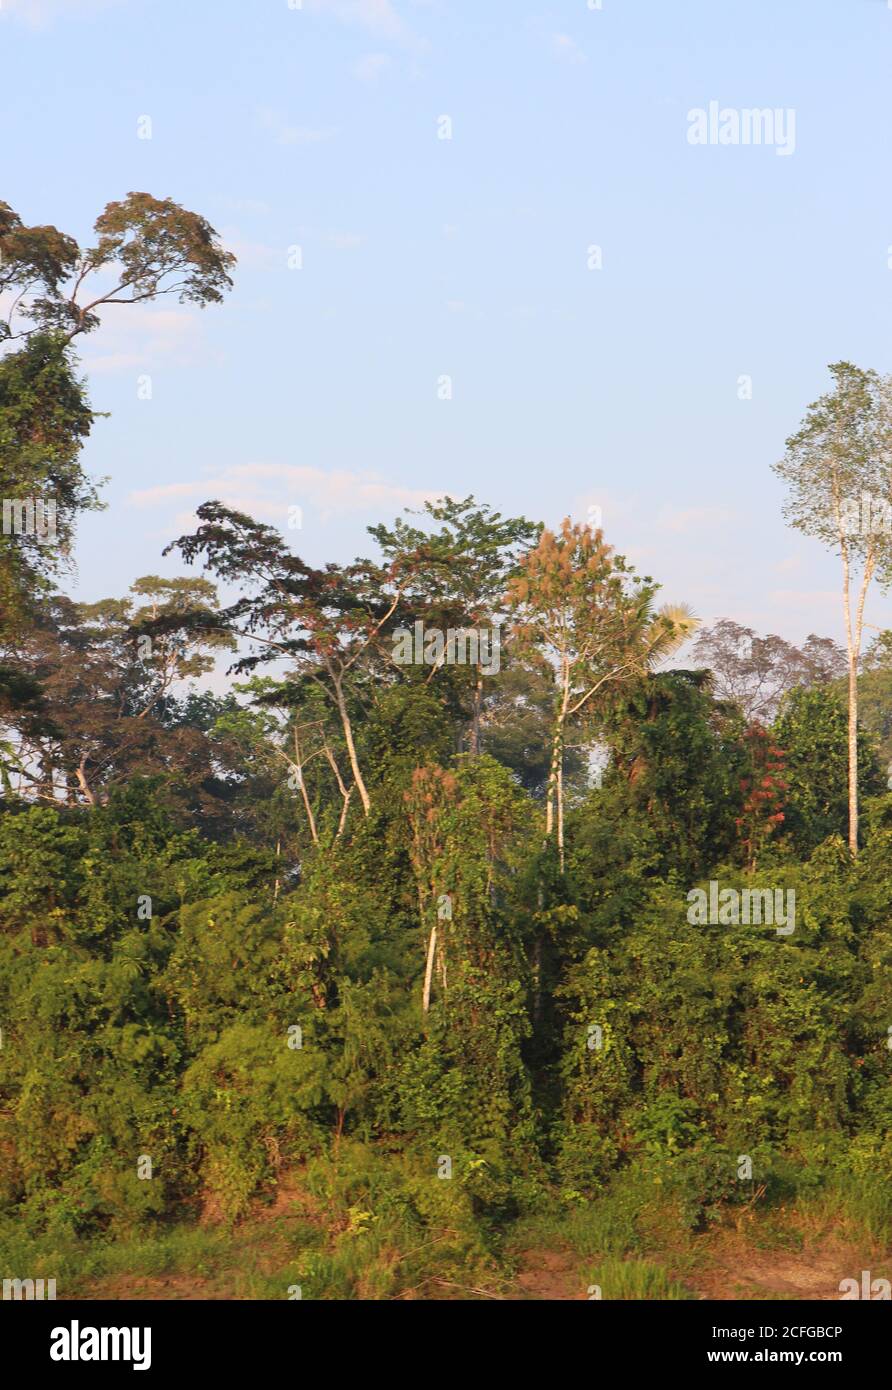 A section of the Amazon rainforest showing the shrub layer, under canopy, canopy and evergent layers with a variety of trees in Madre de Dios, Peru Stock Photo